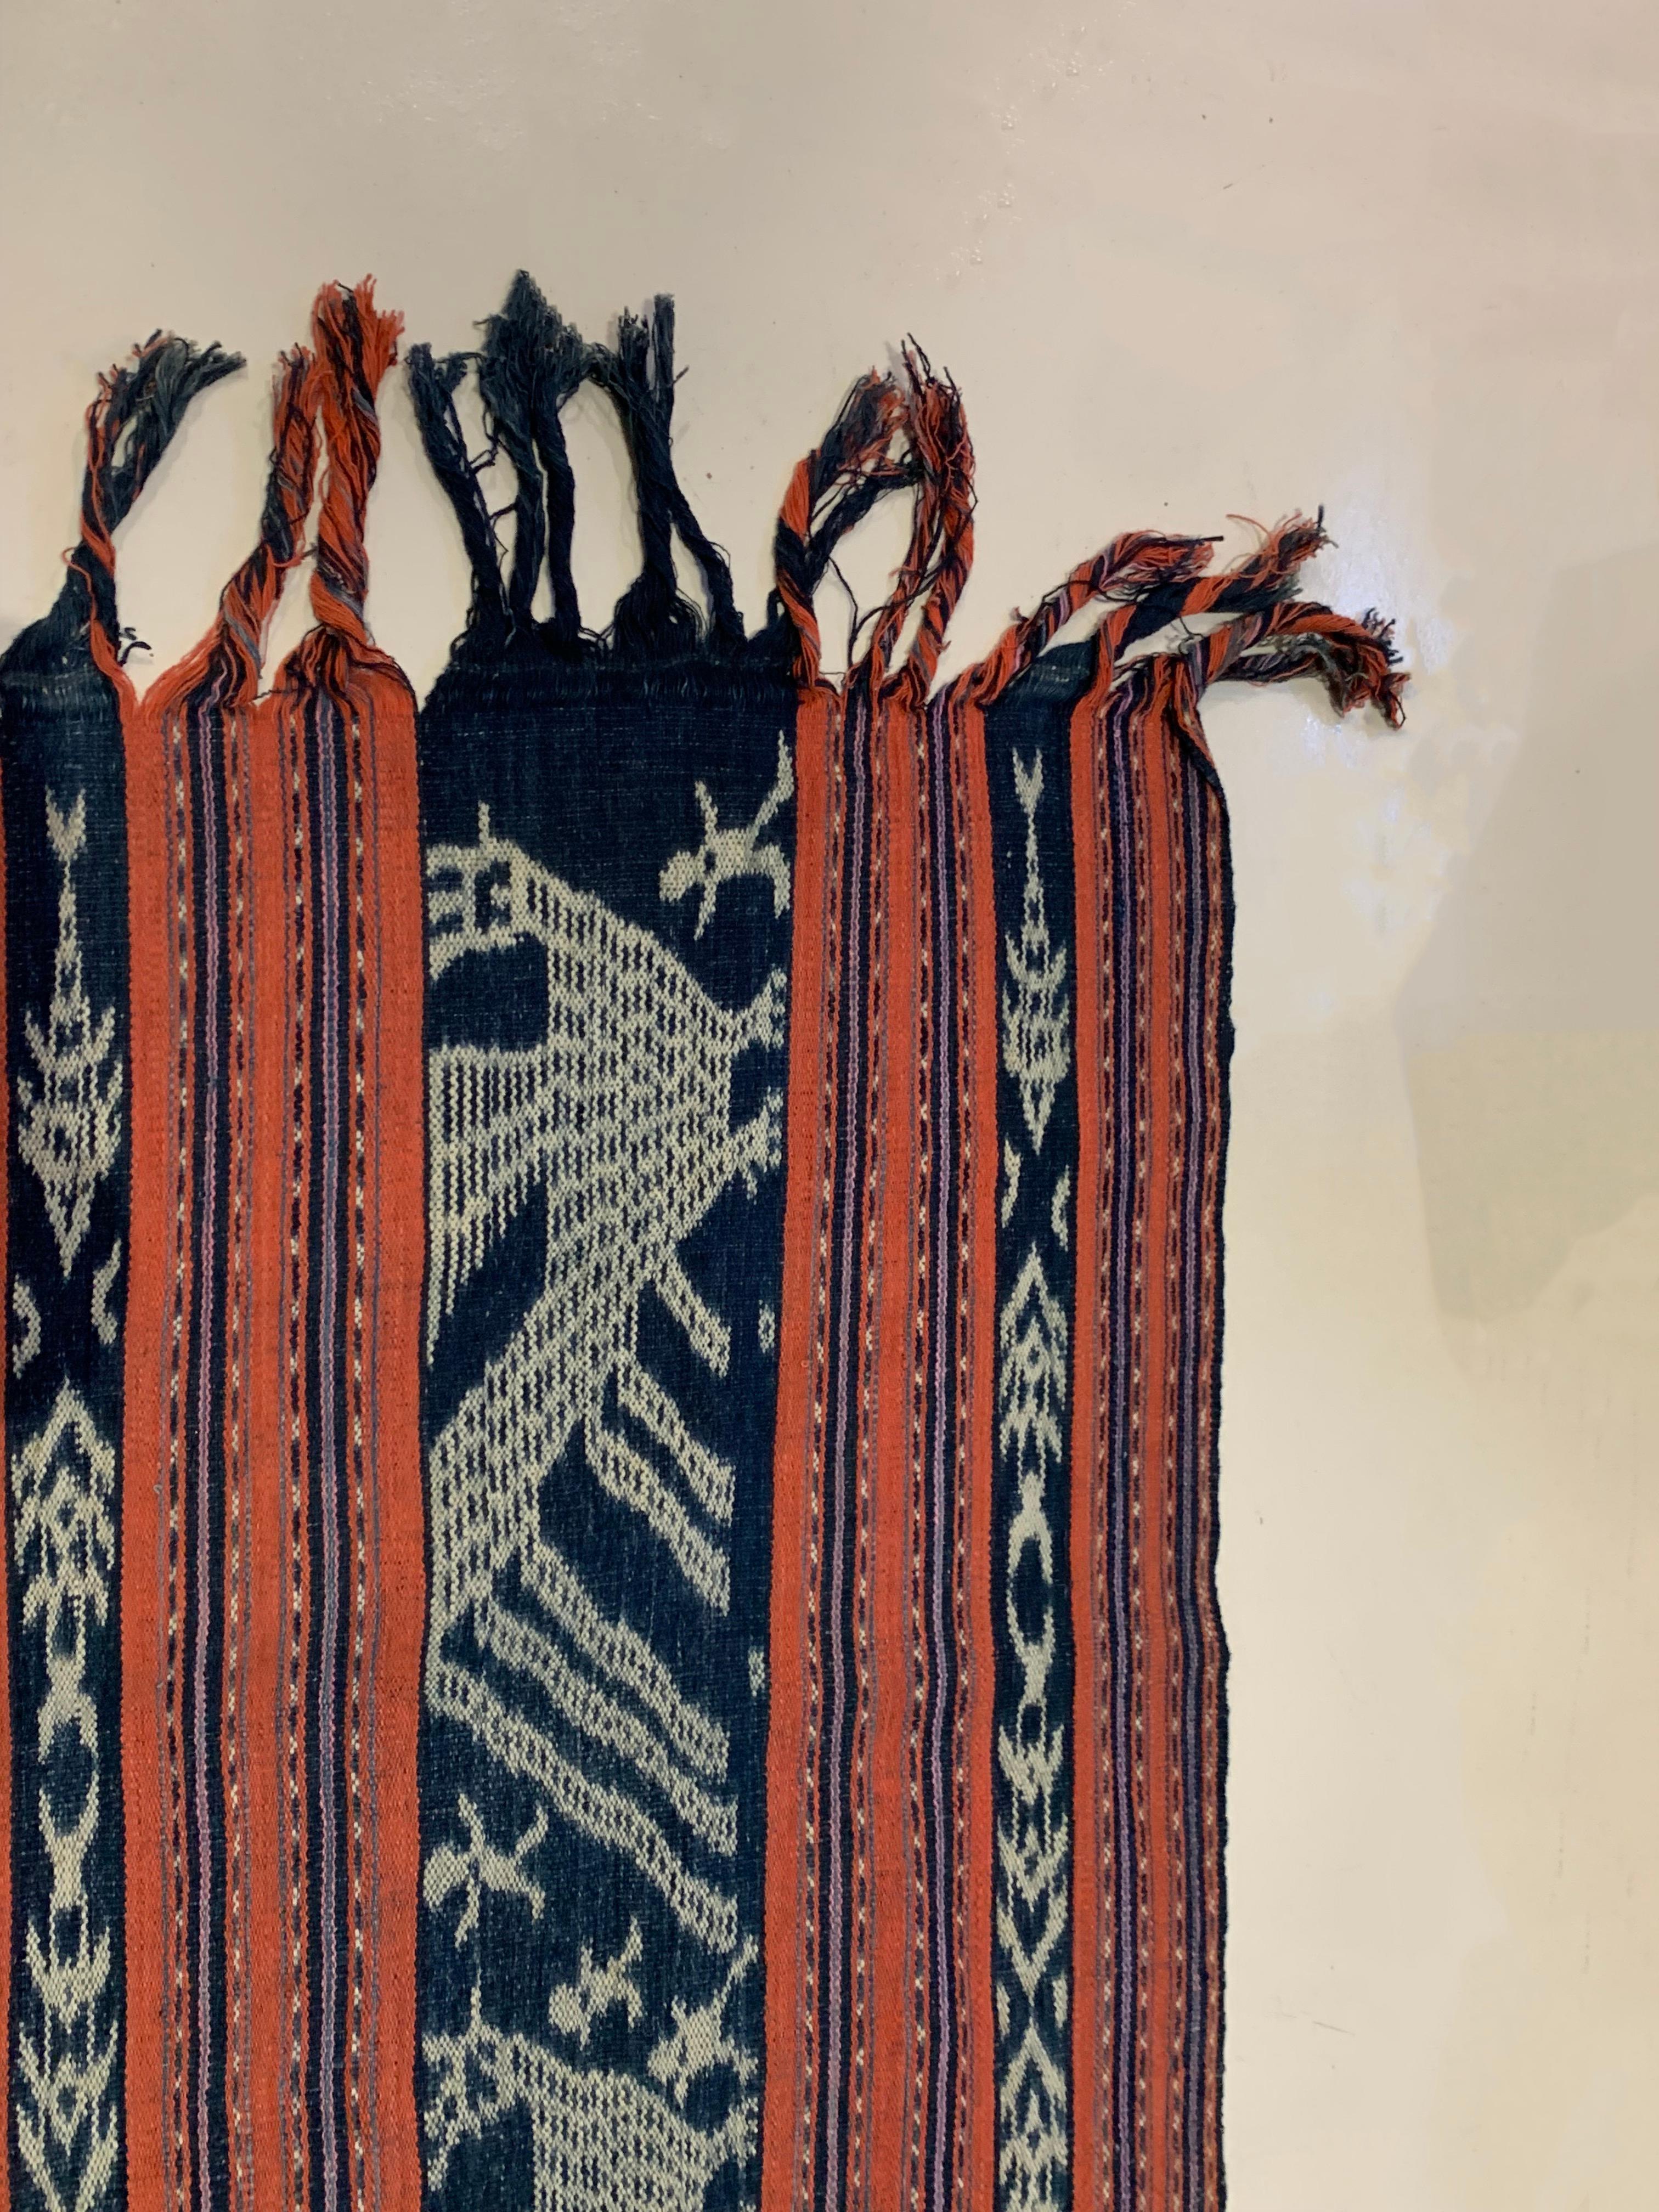 Mid-20th Century Ikat Textile from Timor Stunning Tribal Motifs & Colors, Indonesia, c. 1950 For Sale